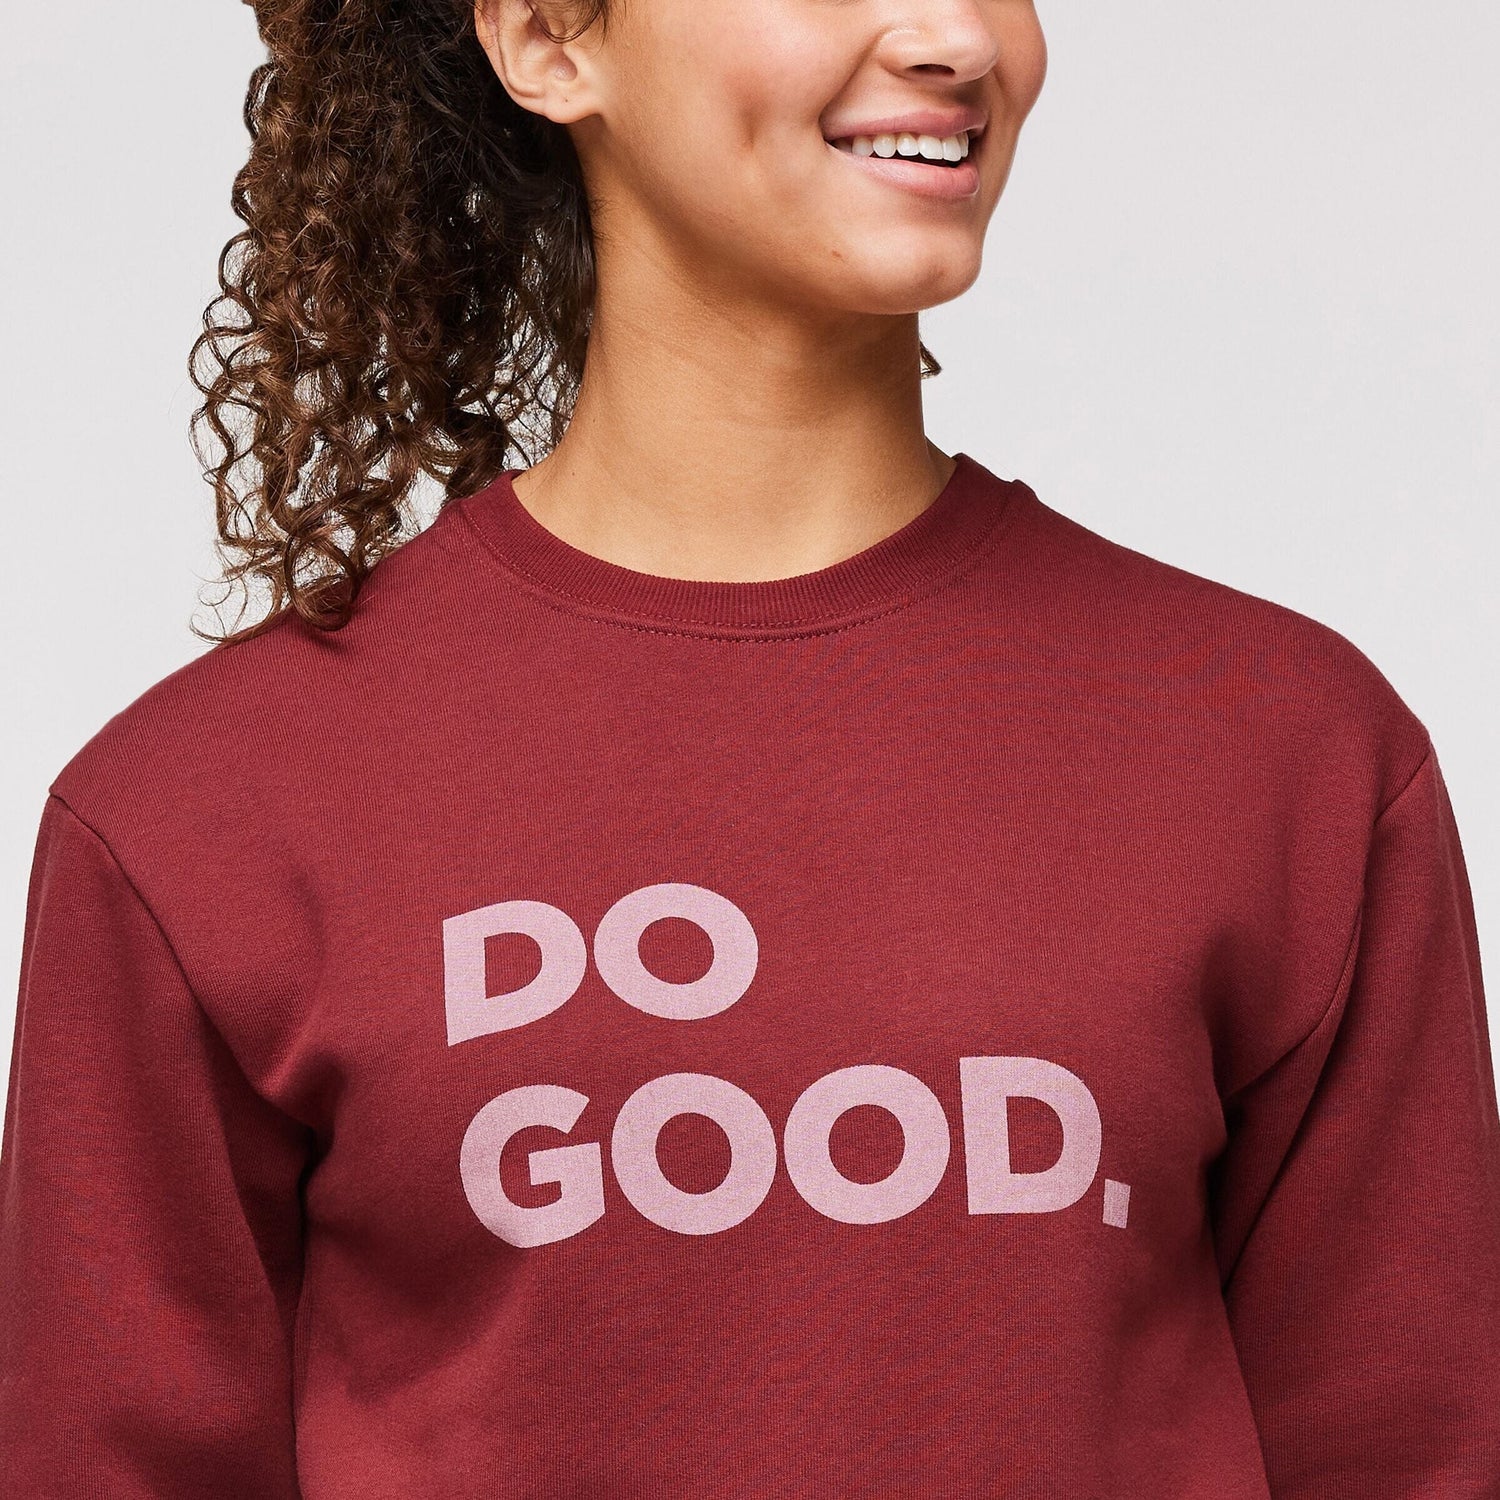 Cotopaxi - W's Do Good Crew Sweatshirt - Organic Cotton & Recycled Polyester - Weekendbee - sustainable sportswear